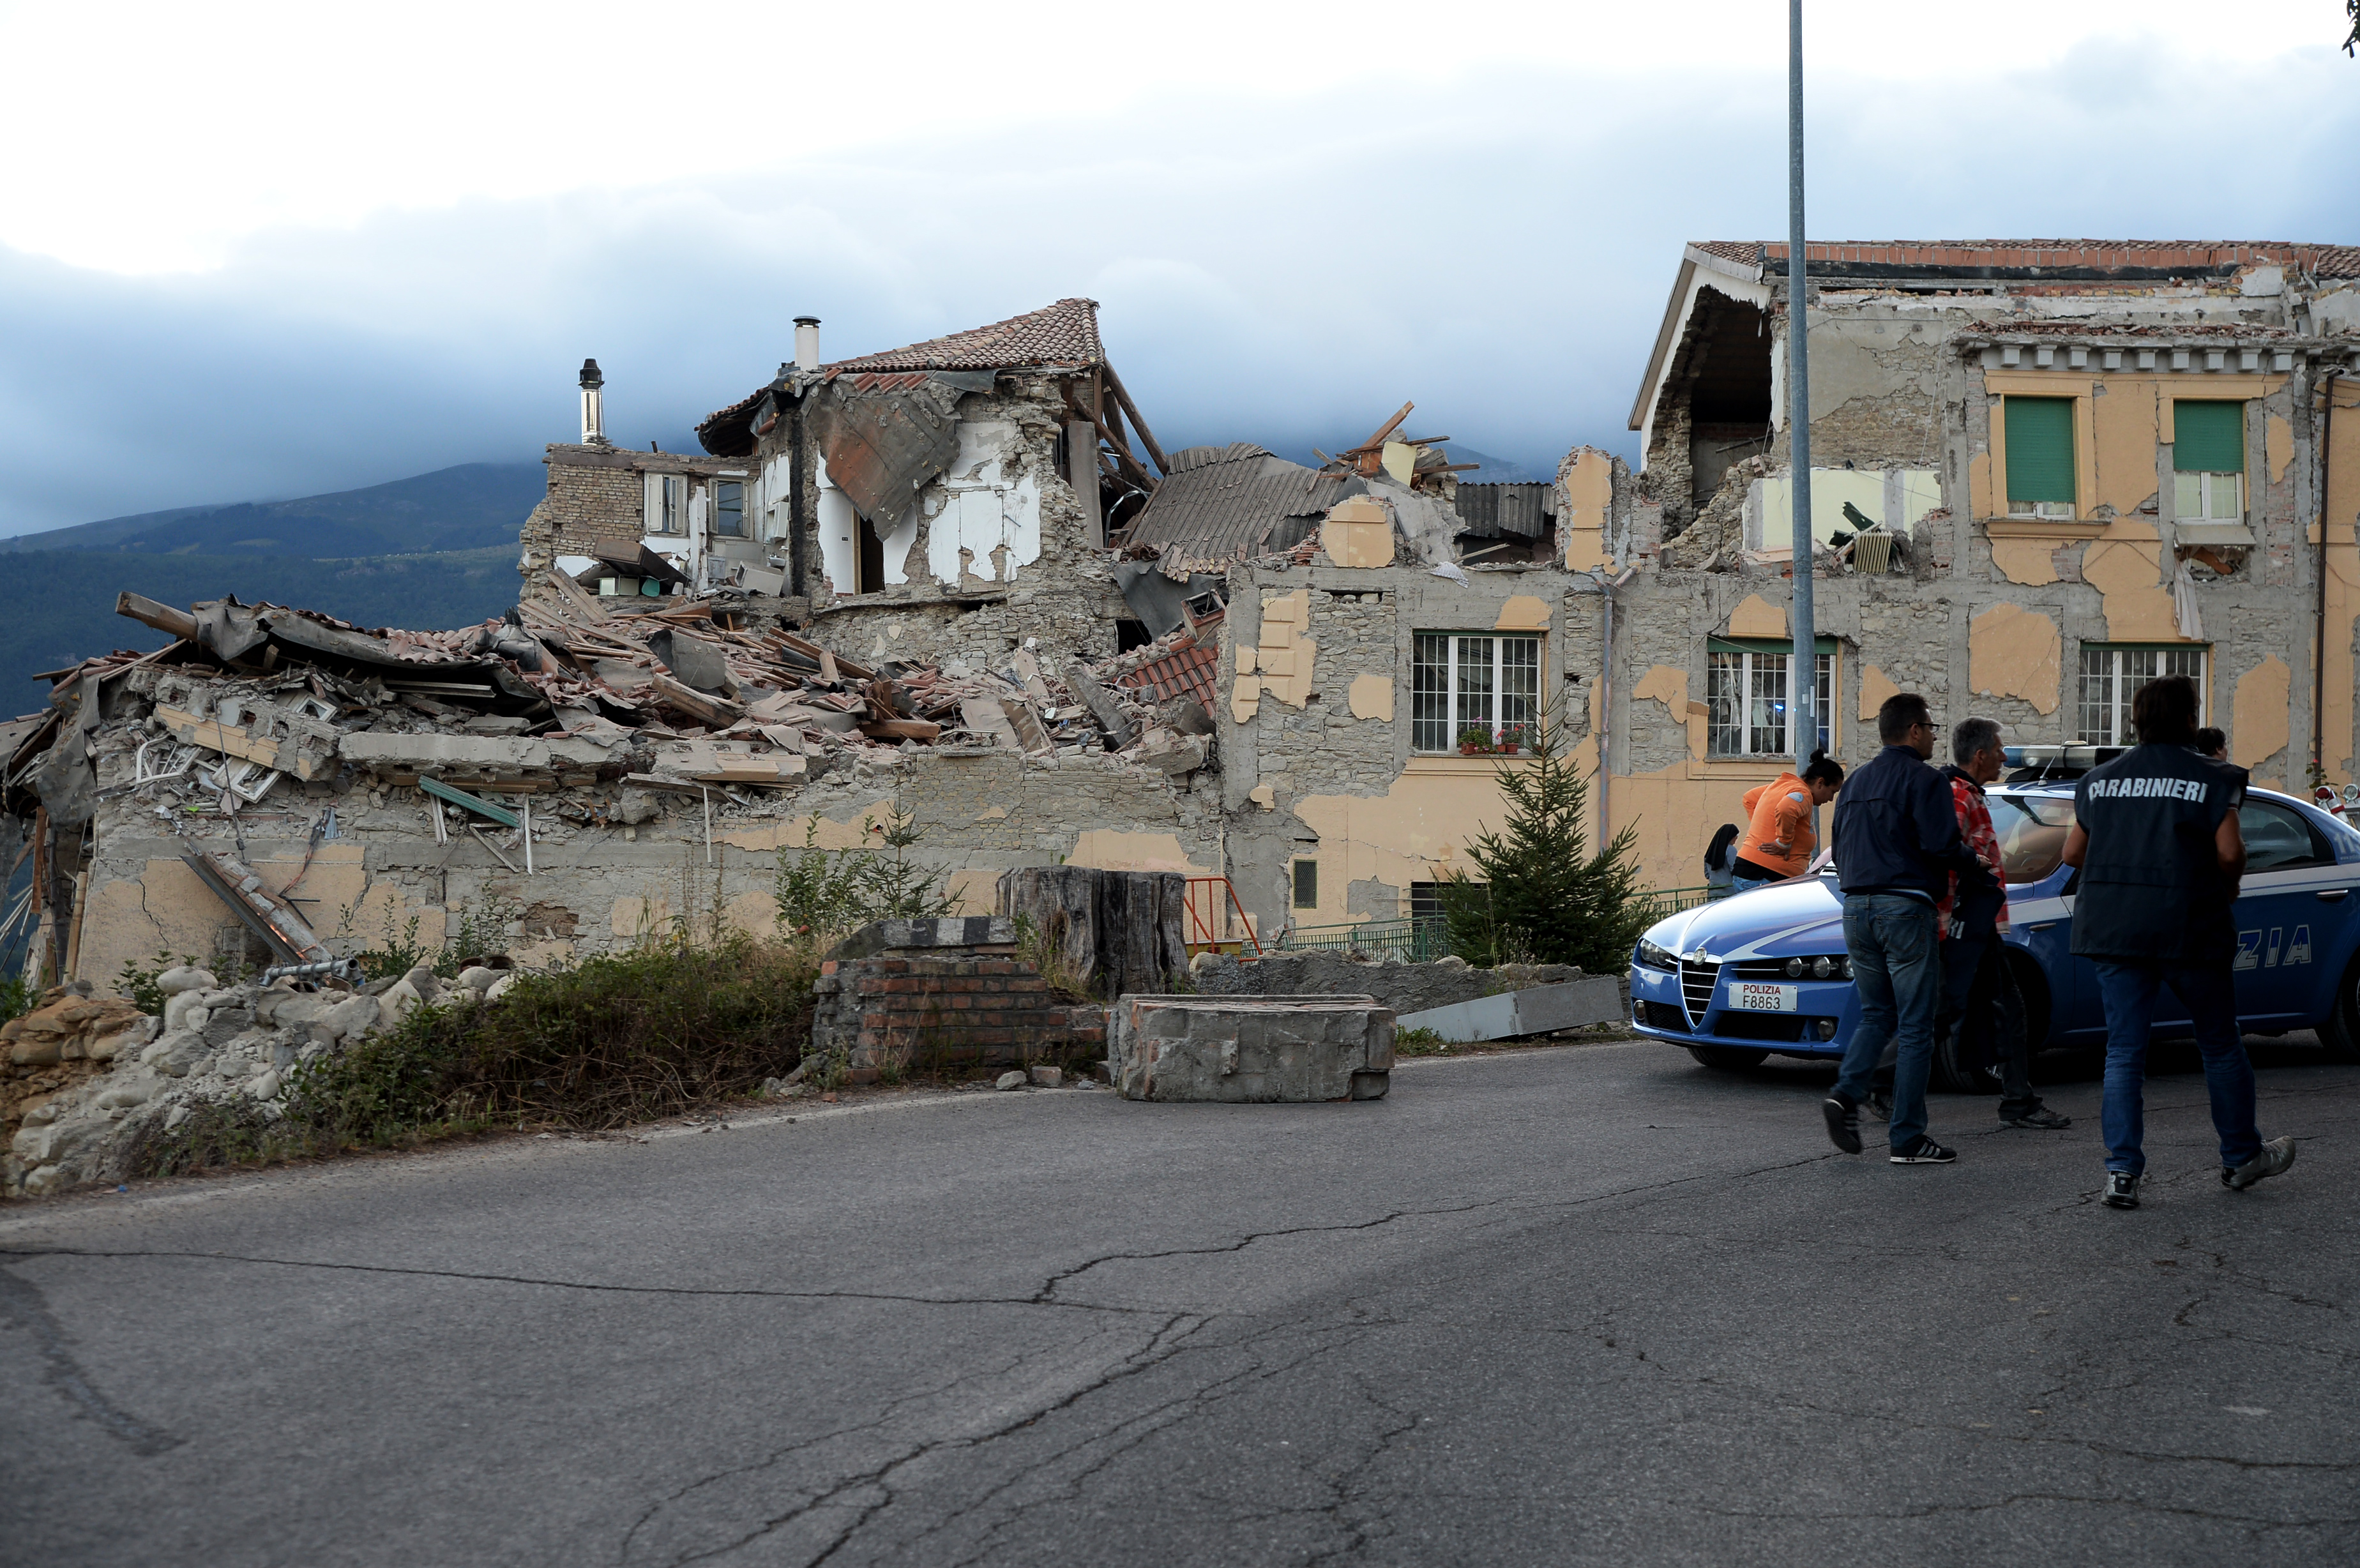 Policemen walk past damaged buildings after a strong heartquake hit Amatrice on August 24, 2016. Central Italy was struck by a powerful, 6.2-magnitude earthquake in the early hours, which has killed at least three people and devastated dozens of mountain villages. Numerous buildings had collapsed in communities close to the epicenter of the quake near the town of Norcia in the region of Umbria, witnesses told Italian media, with an increase in the death toll highly likely. / AFP PHOTO / FILIPPO MONTEFORTE